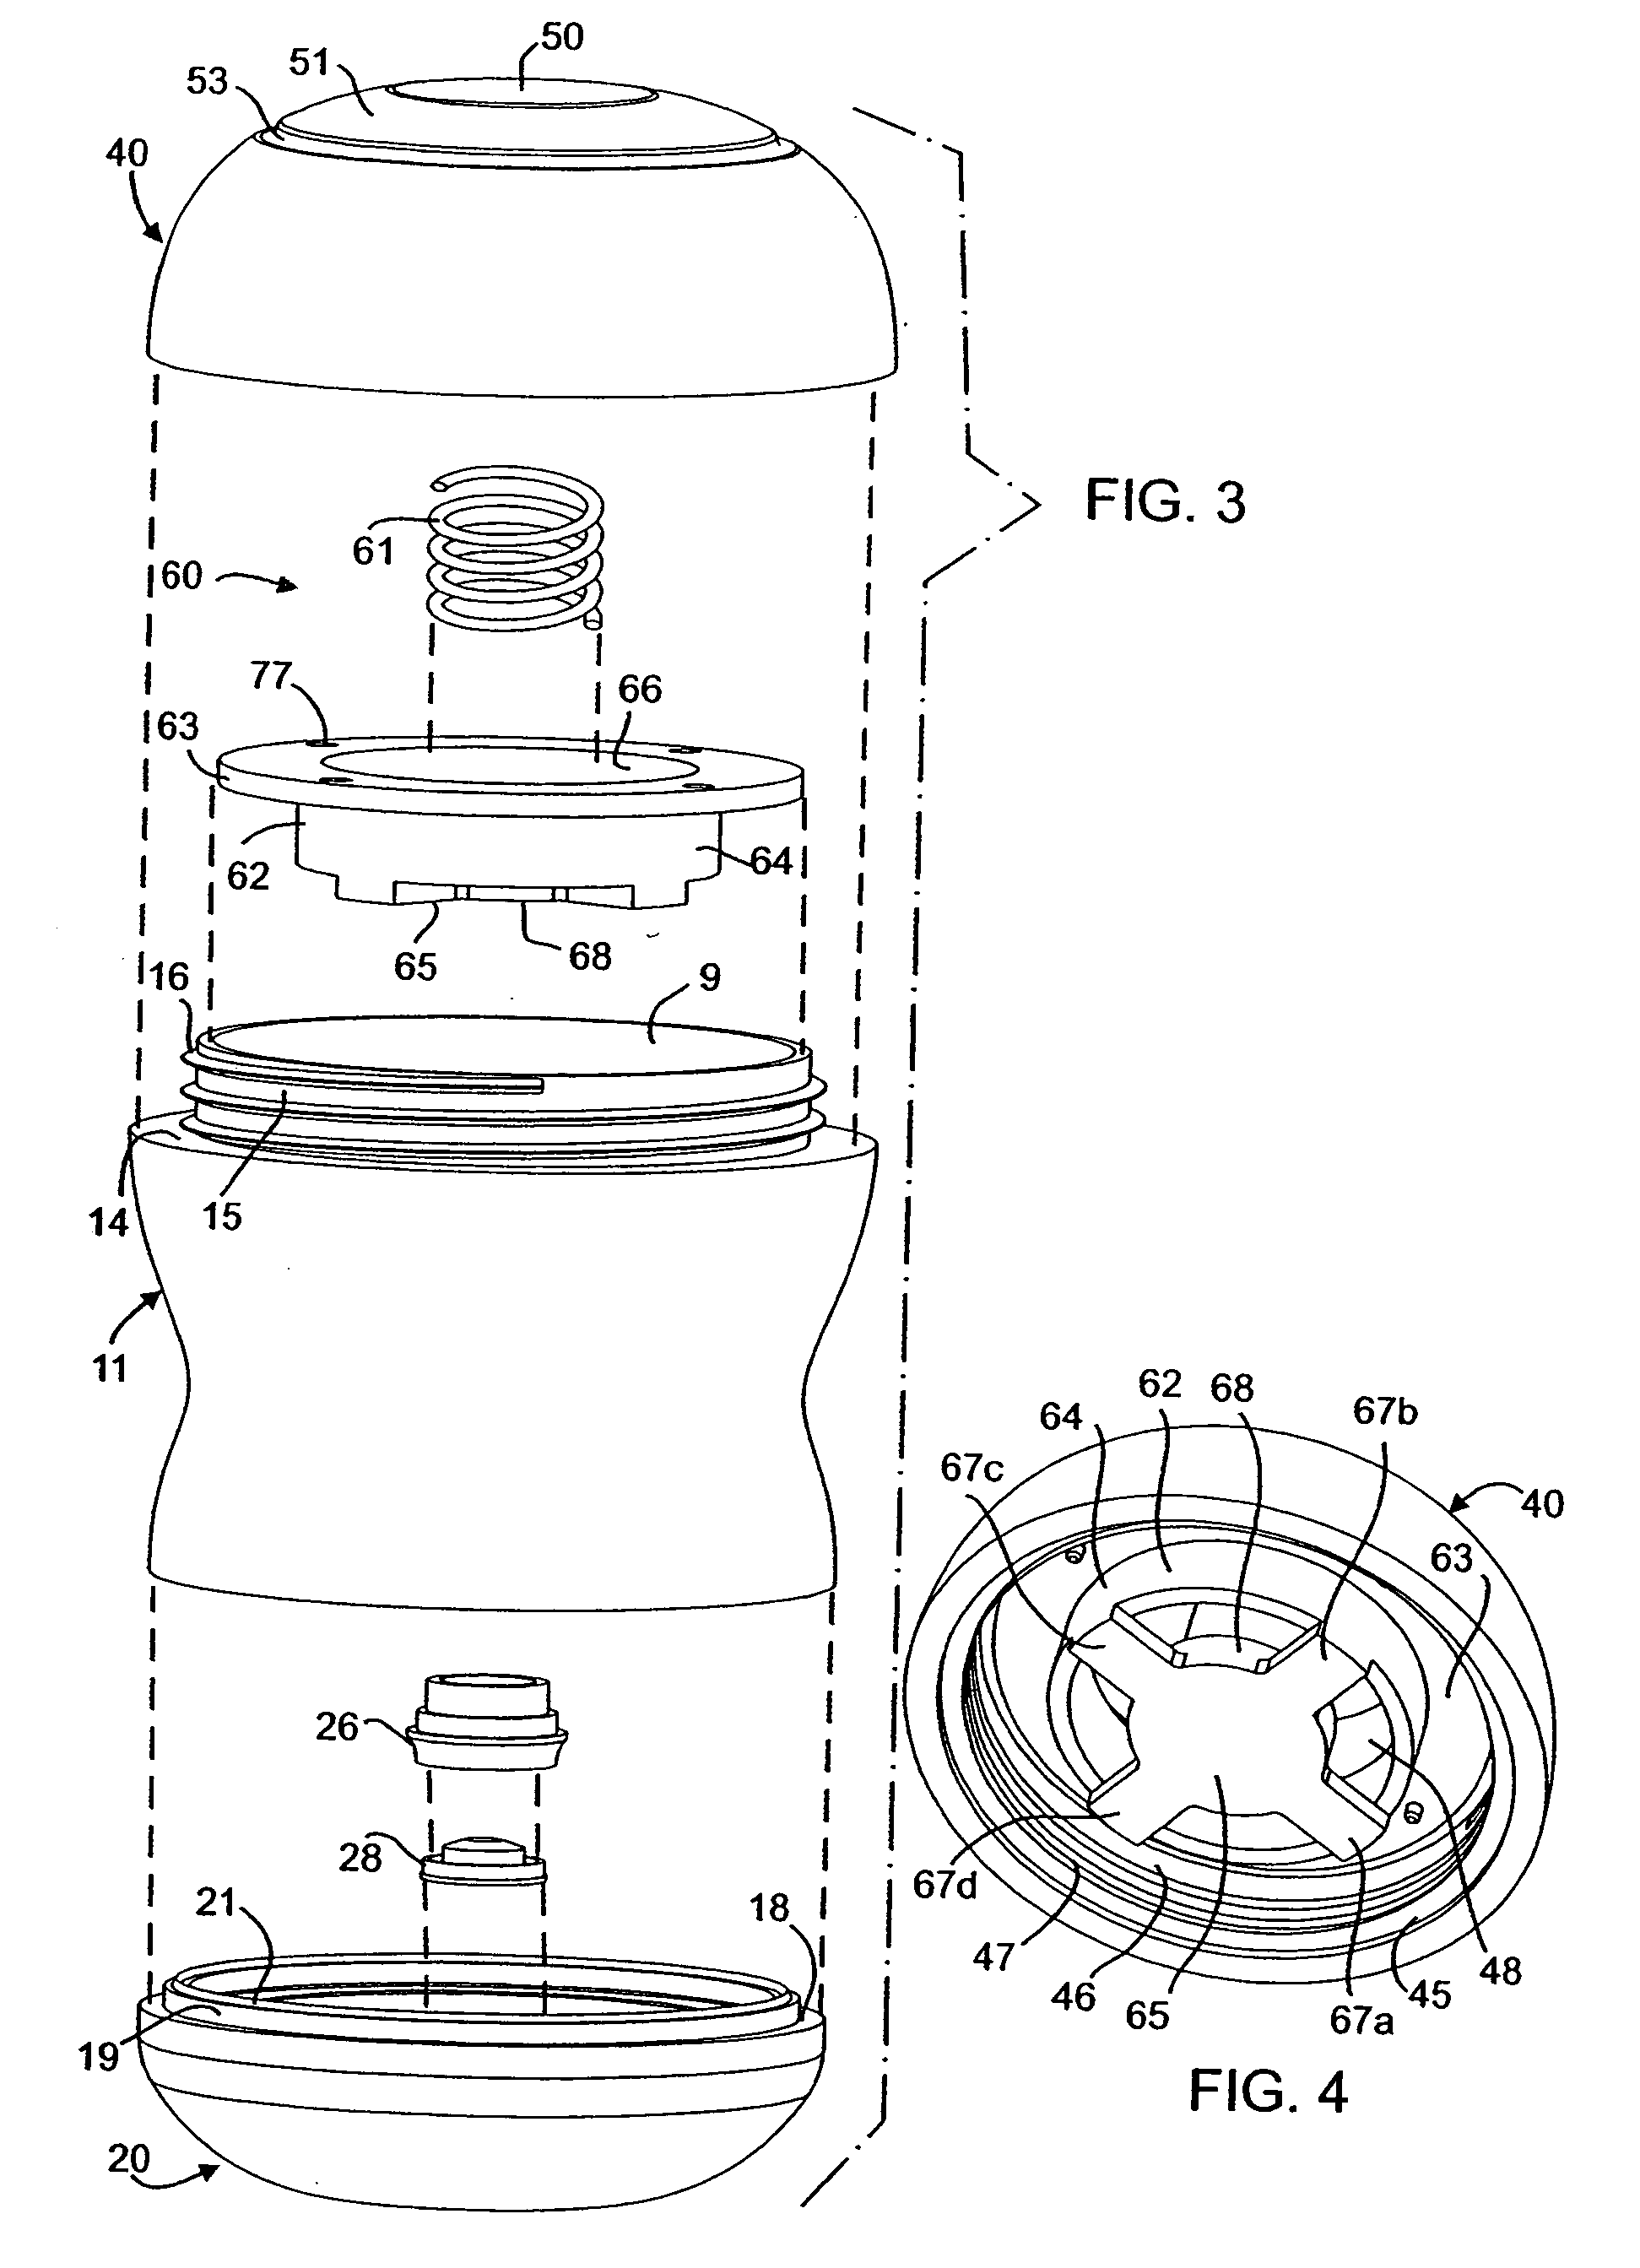 Soap dispensing cleaning device